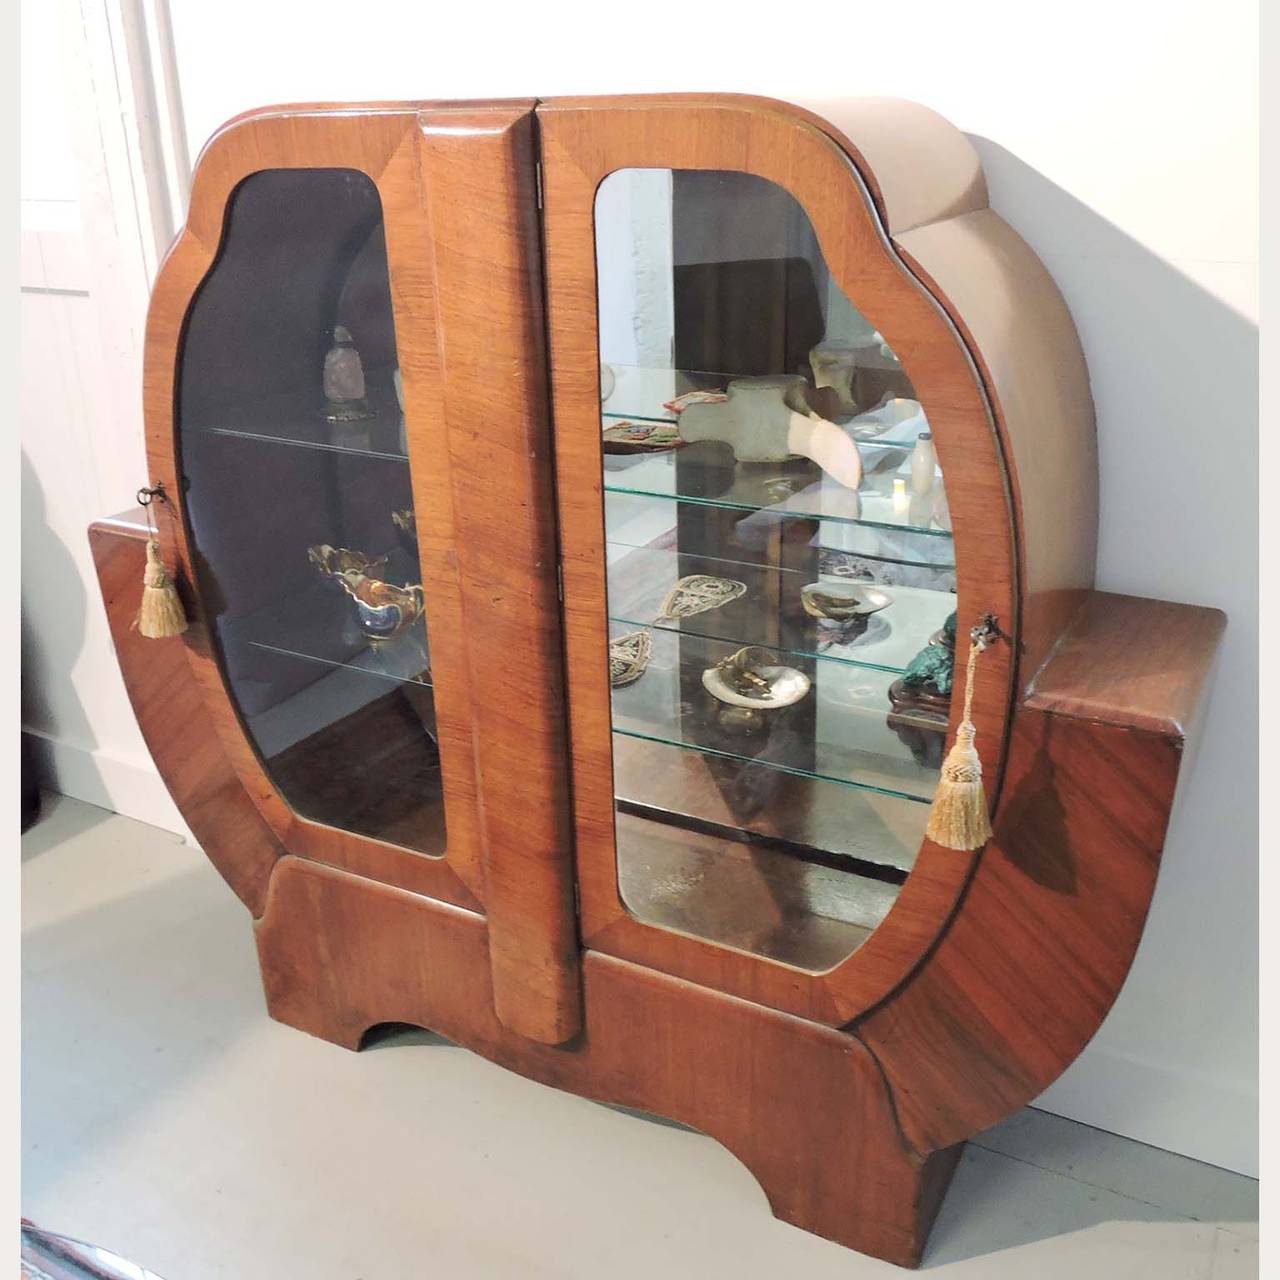 French Art Deco mahogany veneer vitrine, early 20th century. Free for two-door glass cabinet with two glass shelves.
Dimensions: 47 3/4 x 52 1/2 x 12 1/2 inches.